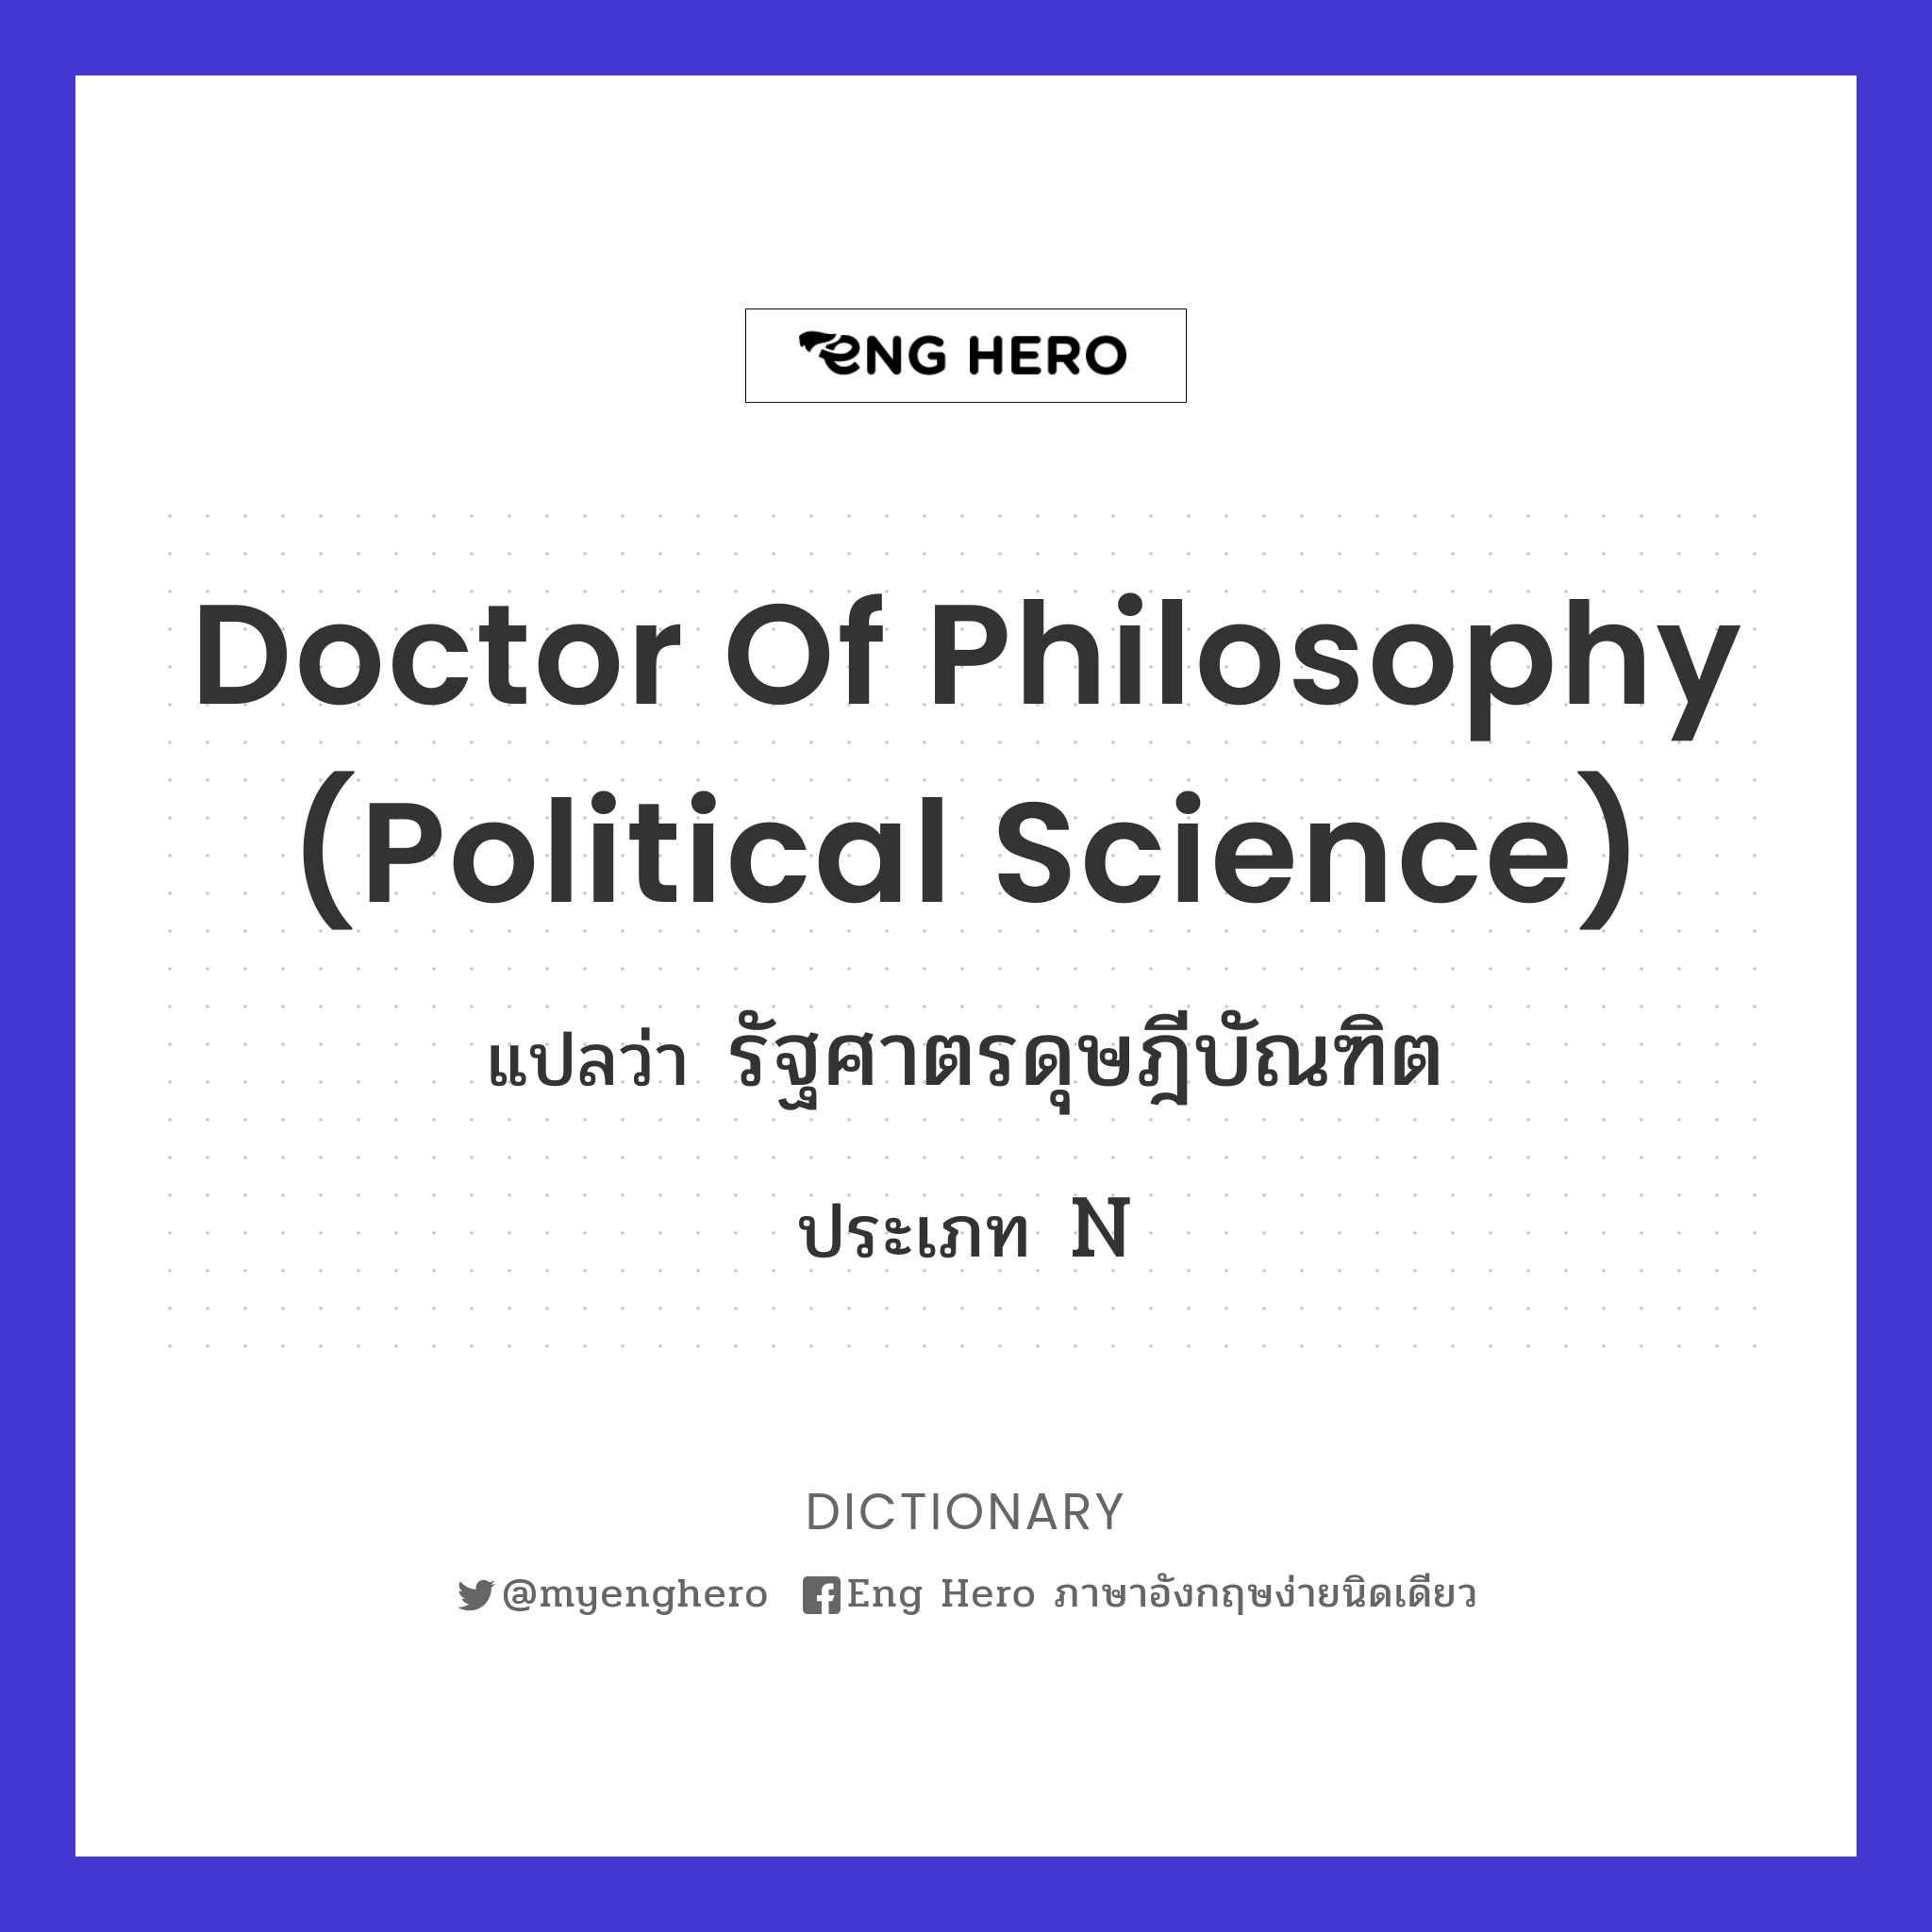 Doctor of Philosophy (Political Science)